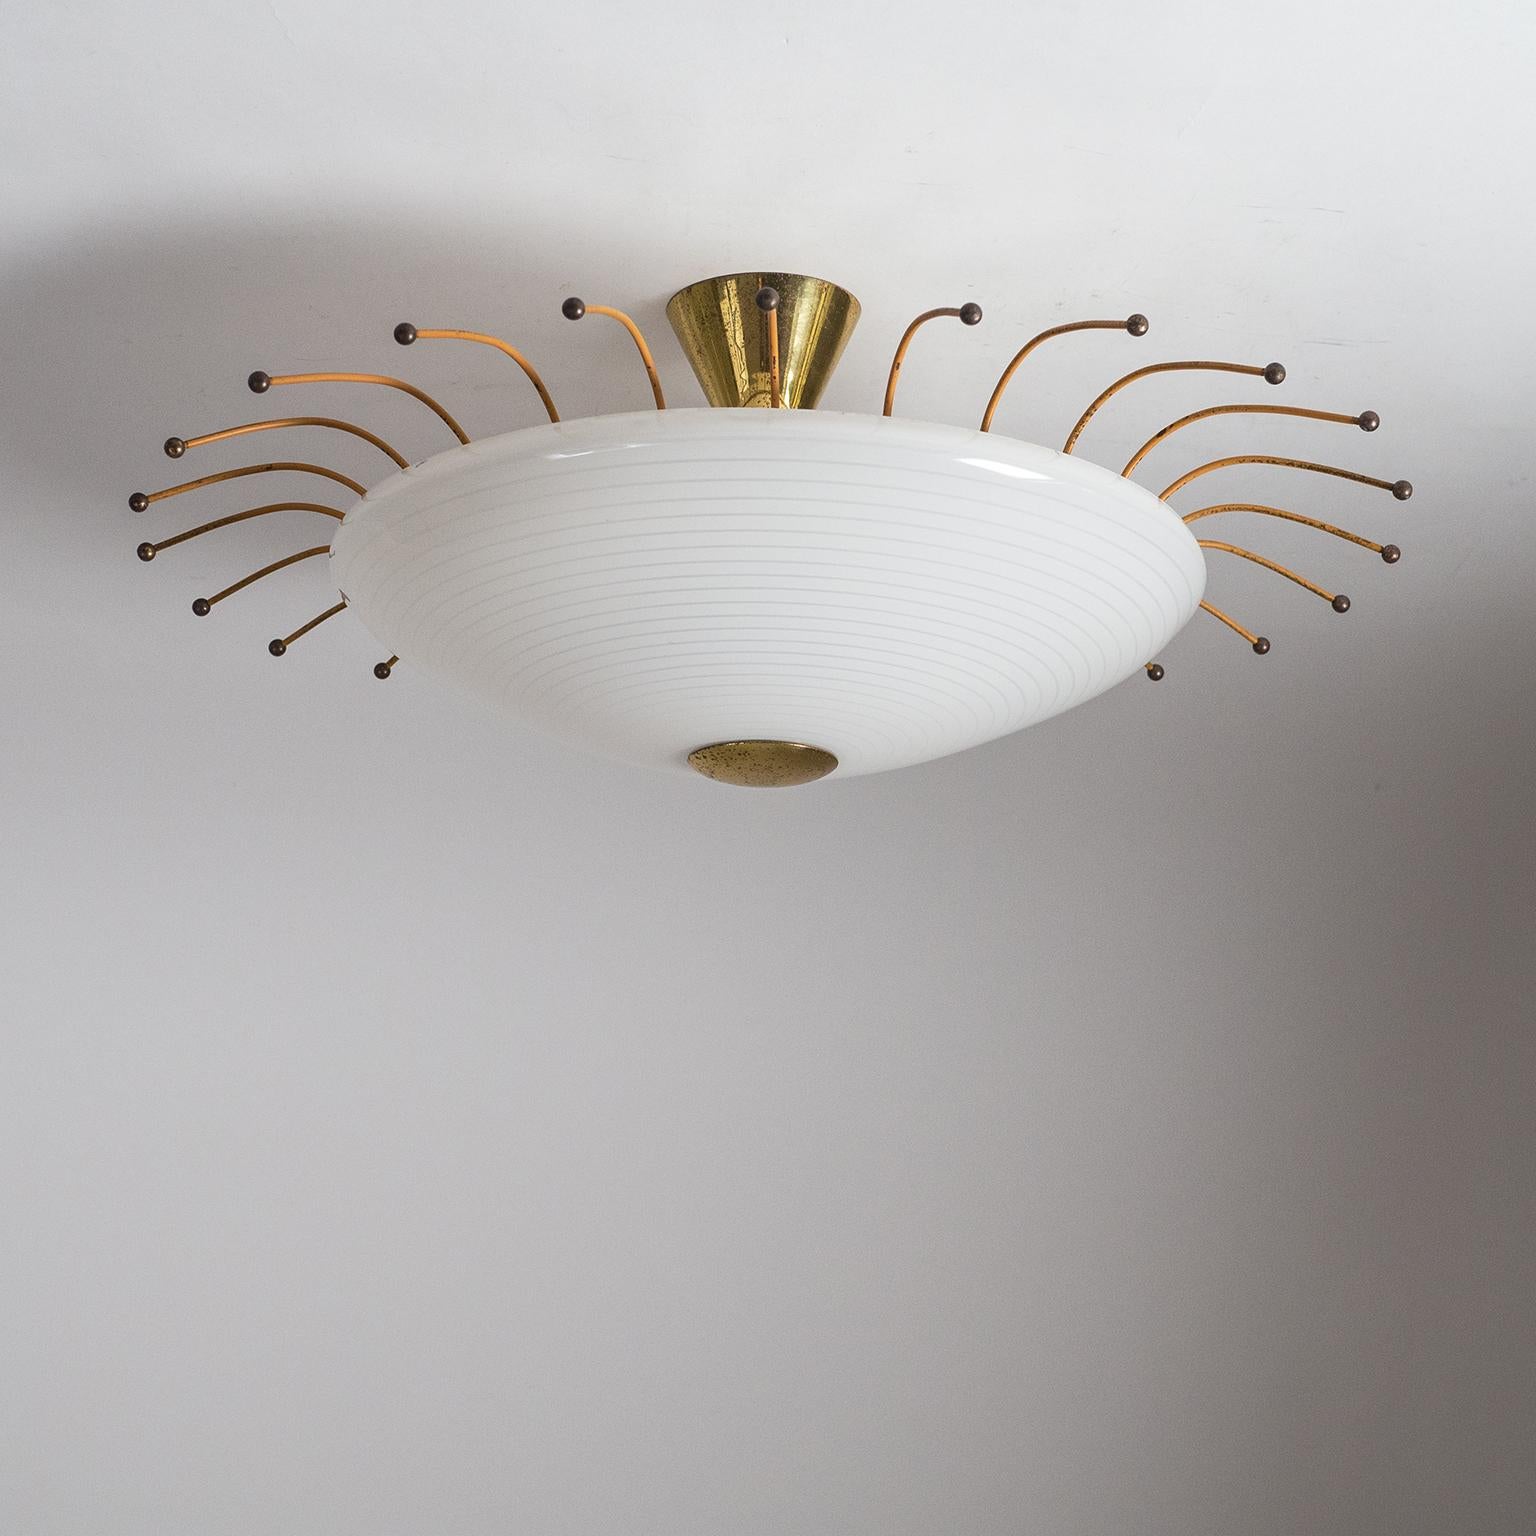 Charming midcentury ceiling light, circa 1950. A glass disc, frosted on the inside, with concentric white enameled circles is held by a brass hardware. Surrounding the glass is an array of wires lacquered in a subdued 'rusty orange' with brass